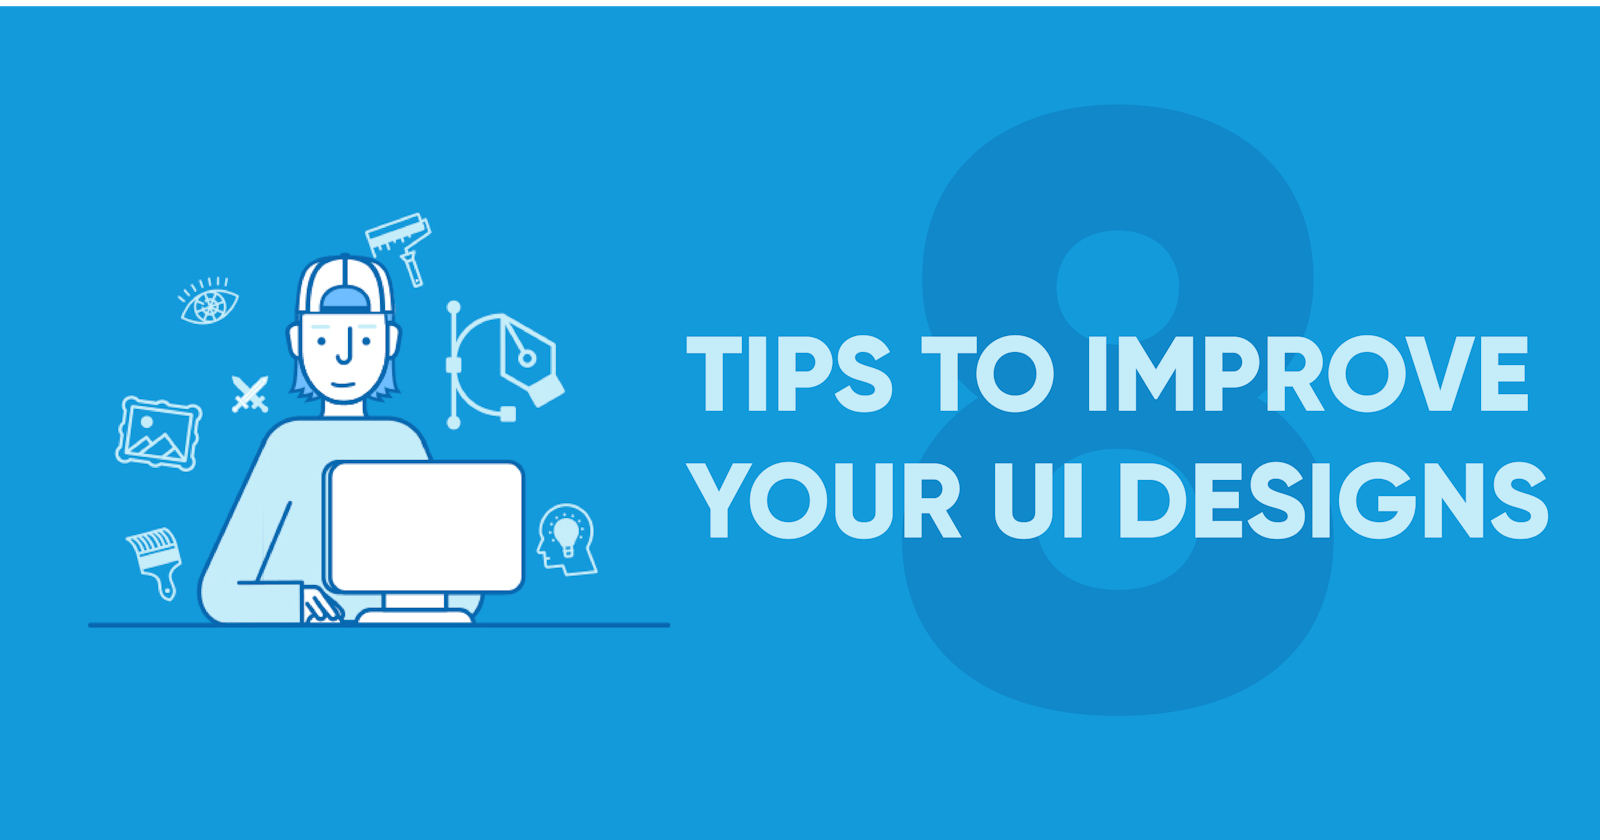 8 Tips To Improve Your UI Designs